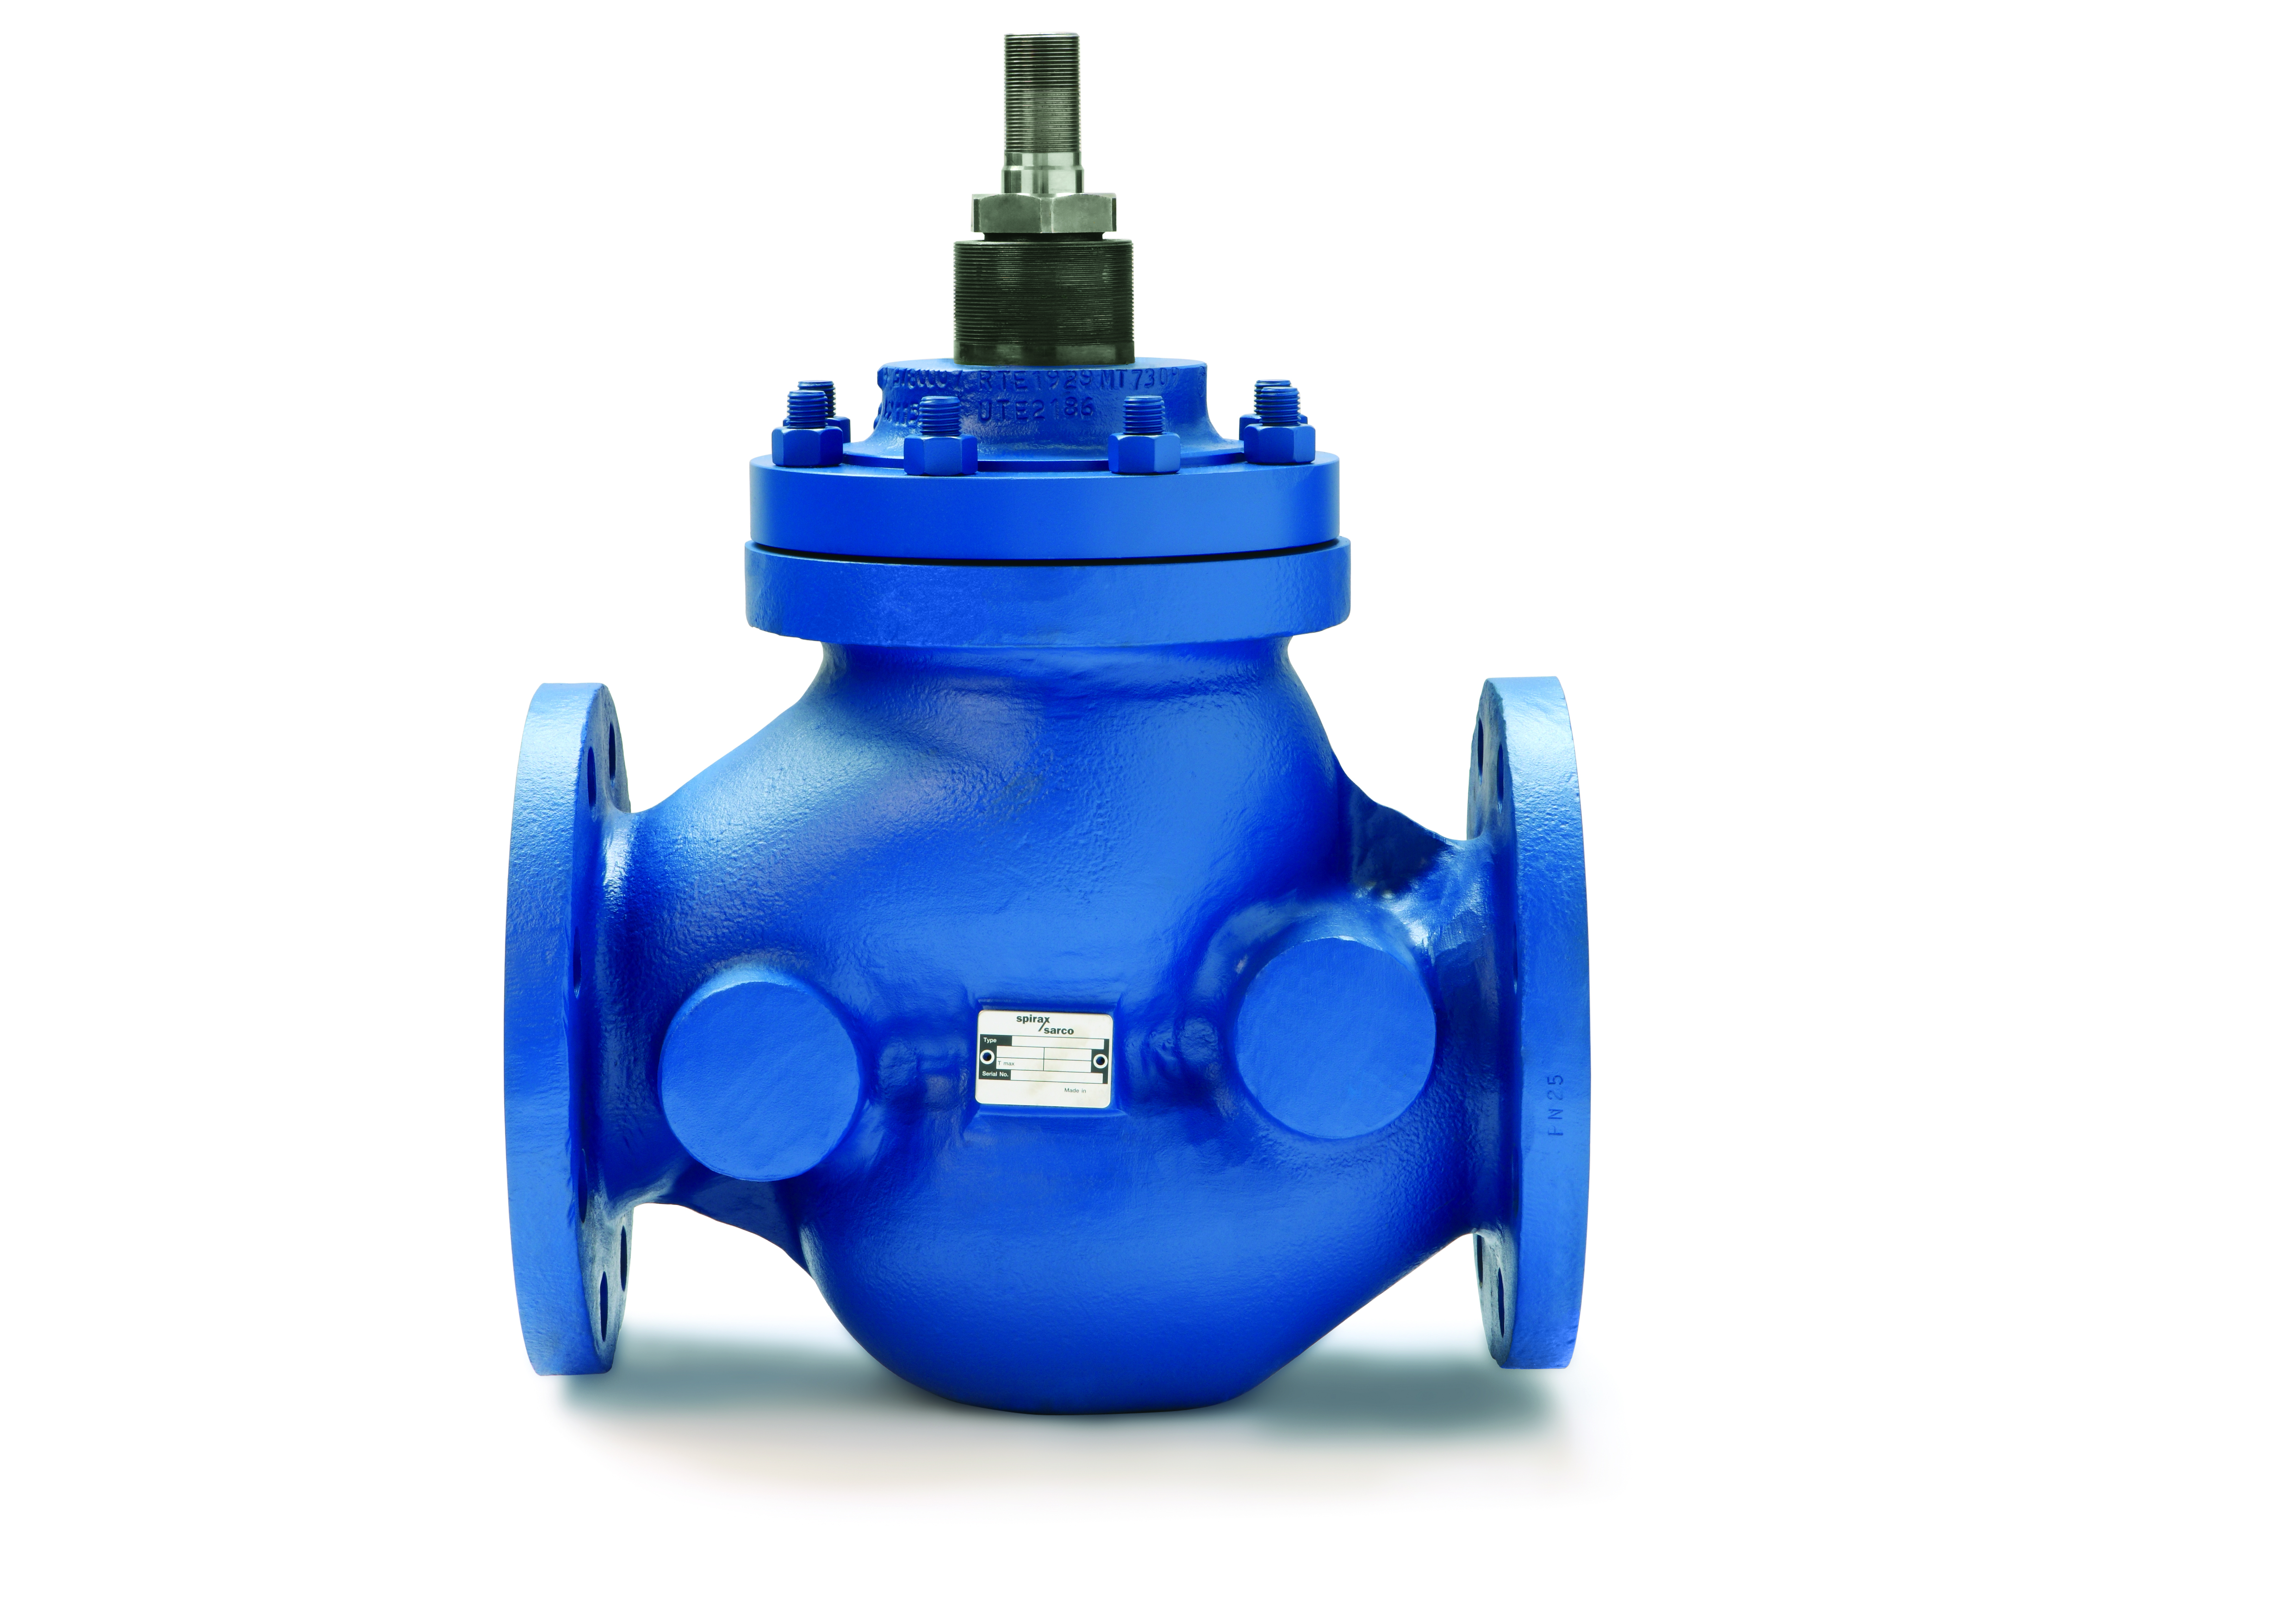 "The addition of stainless steel to the Spira-trol Quick Ship program enables us to offer the benefits of fast order turnaround and ‘plug and play’ installation in a material that offers superior corrosion resistance for demanding environments and applications." said Chris Glass, Spira-trol Product Manager.

More information about Spira-trol modular control valves is available online at www.spiraxsarco.com/us or by calling 
(800) 883-4411